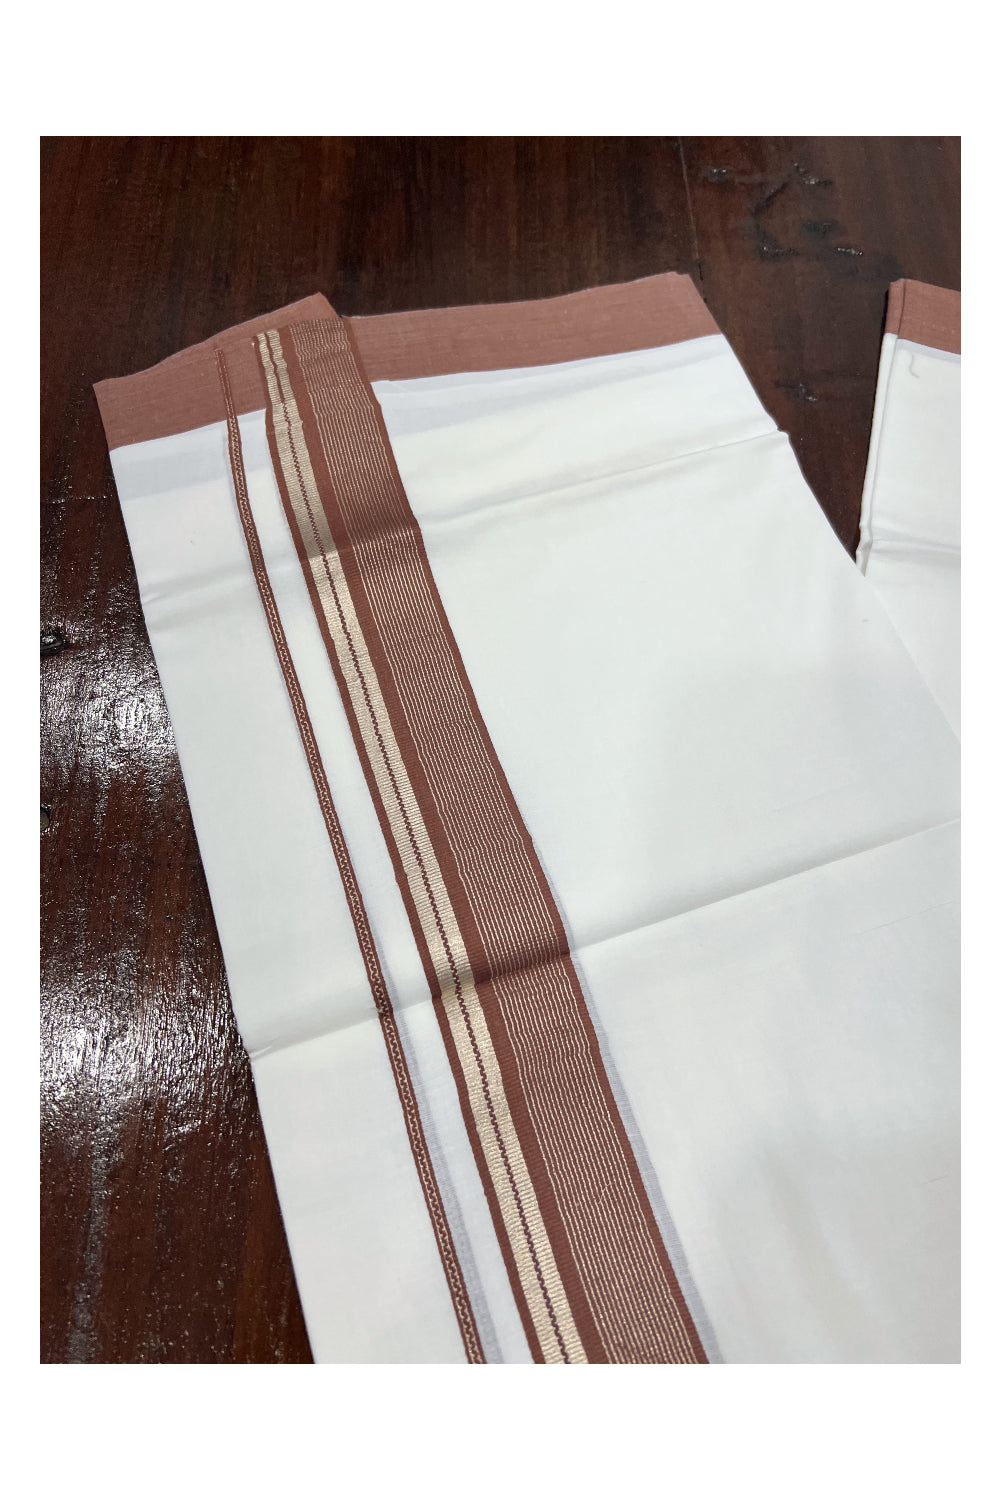 Pure White Cotton Double Mundu with Silver Kasavu and Brown Border (South Indian Dhoti)